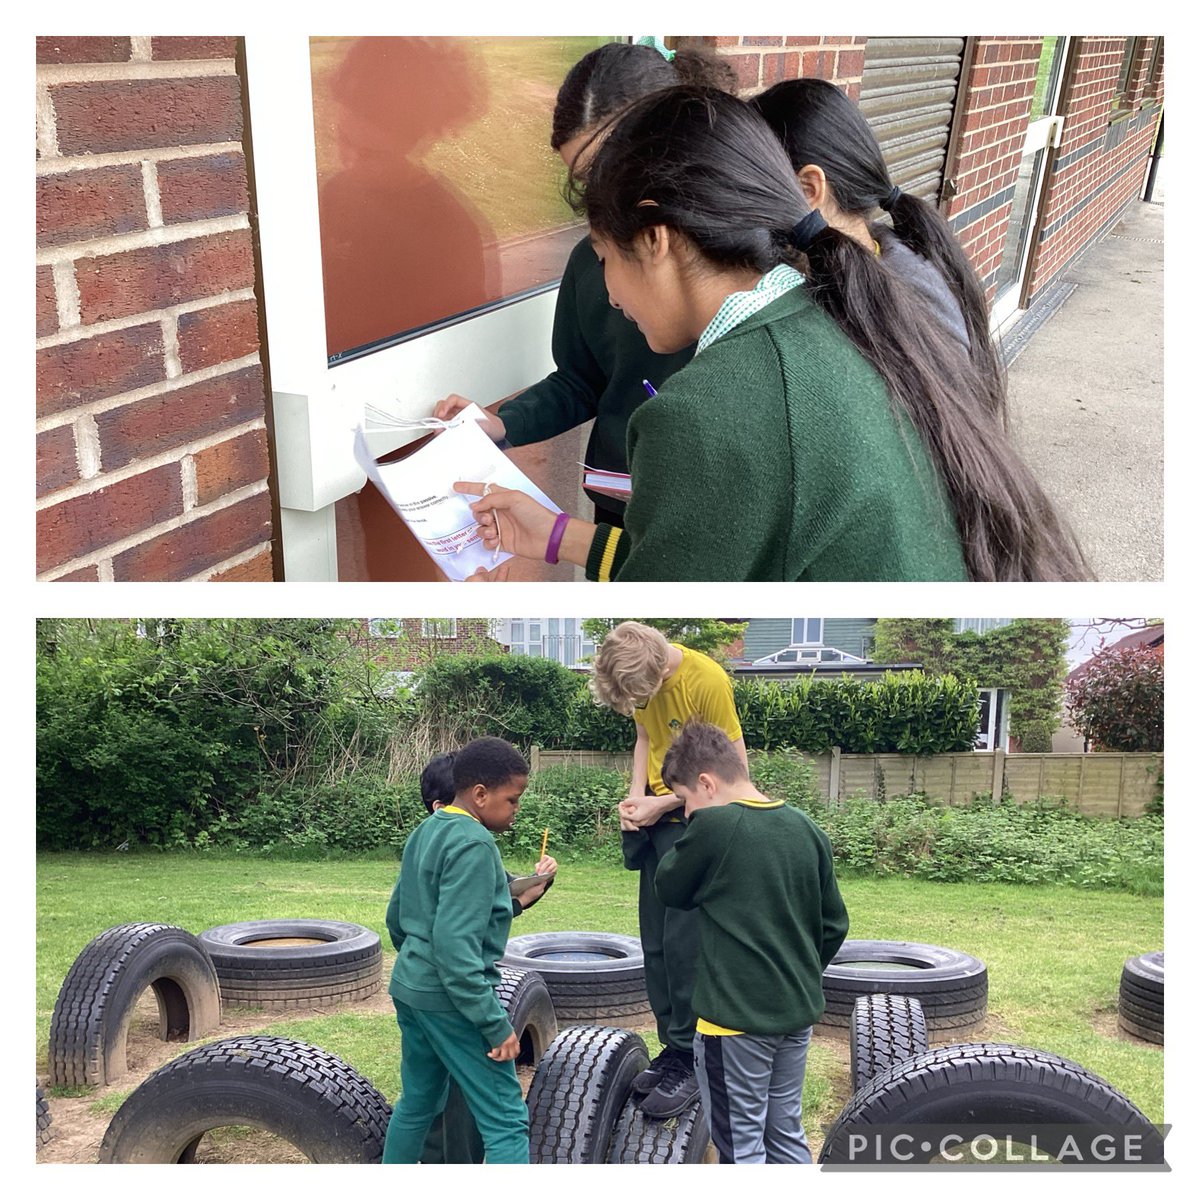 Year 6 had a wonderful time finding clues around our school grounds, combining SPaG and orienteering! #Collaboration 🗺️🔠 #WeAreBrightFutures